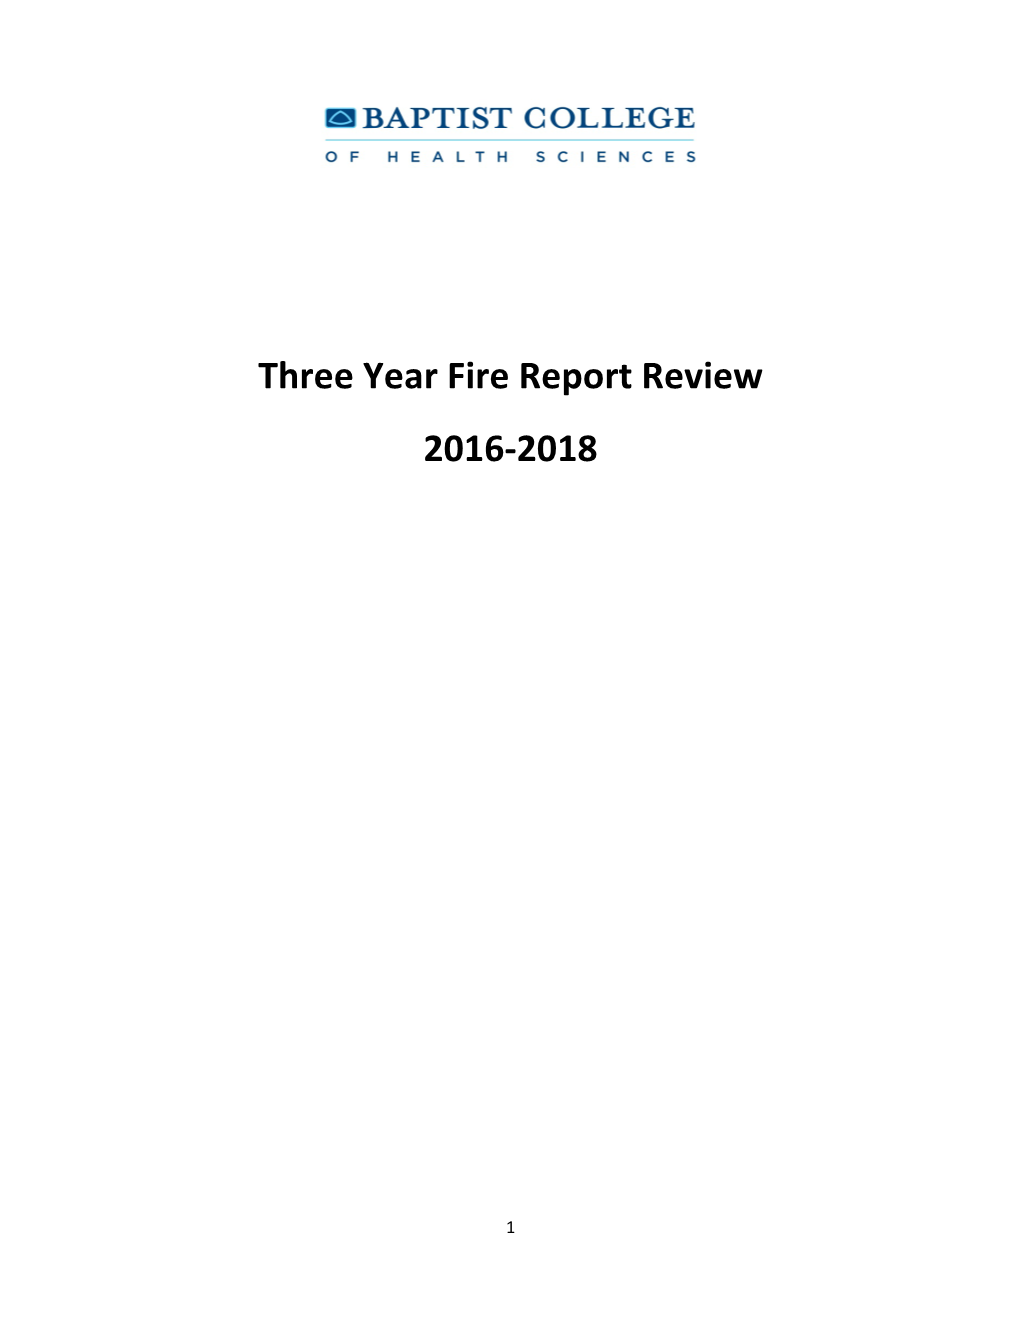 Three Year Fire Report Review 2016-2018